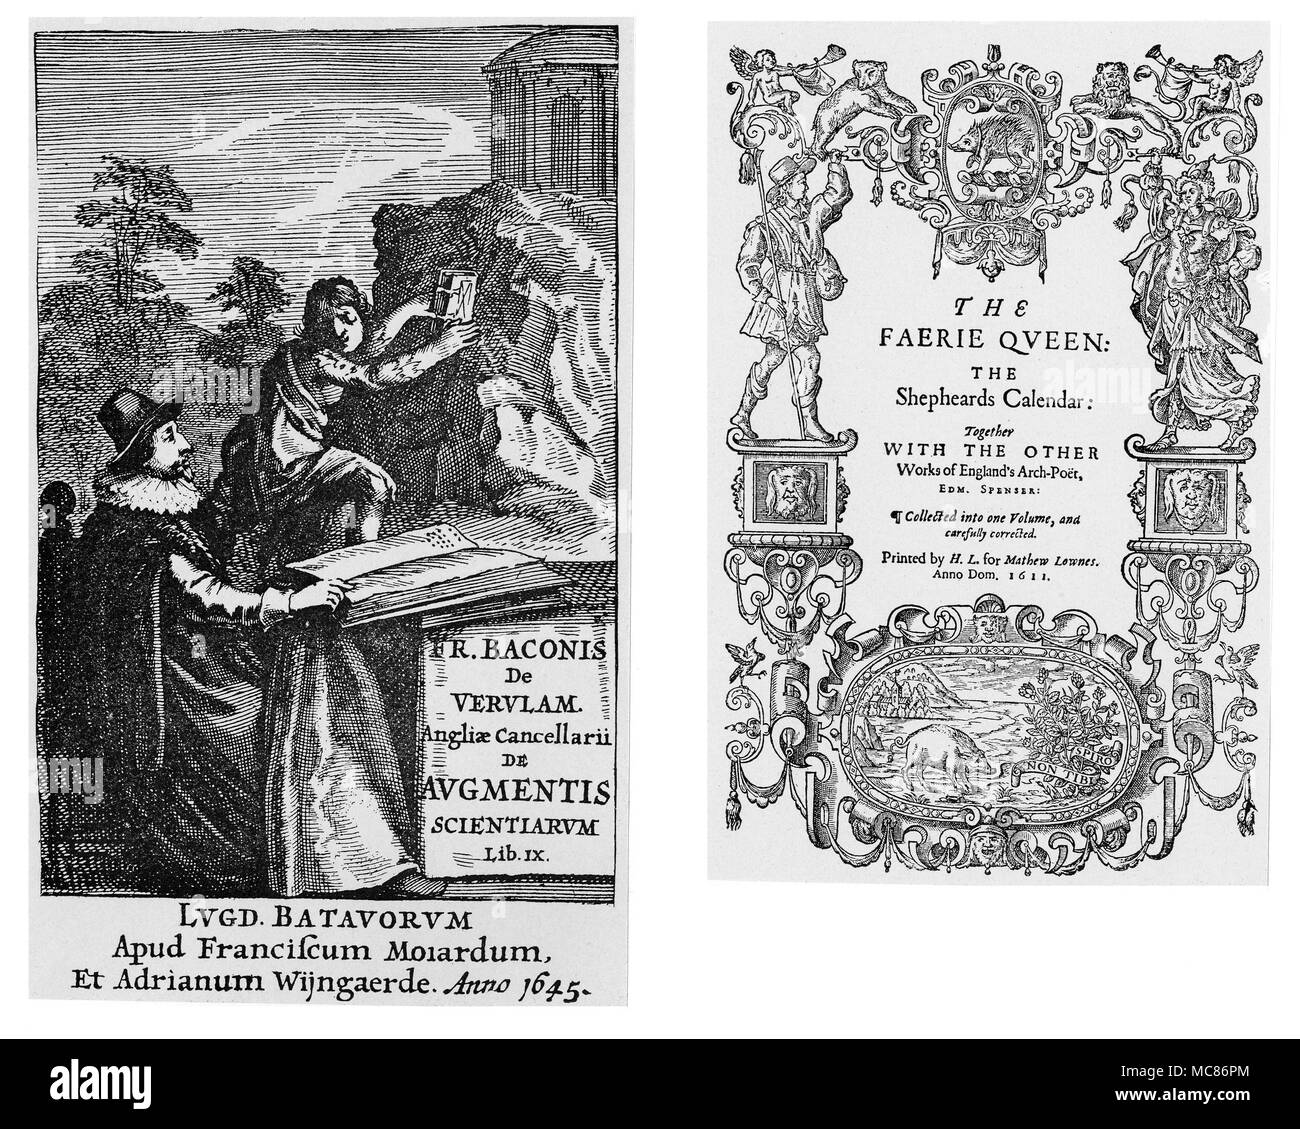 SHAKESPEARE - THE BACON-SHAKESPEARE DEBATE Material illustrative of the Shakespeare-Bacon controversy. [Left]: titlepage of Francis Bacon, De Augmentis Scientiarum, Book 9, 1645. [Right] Titlepage of Spenser's The Faerie Queen: The Shepheards CalendarÃ. 1611. For further information, see 'Shakespeare and Bacon: Can they be Reconciled? Report of a Debate (January 1900) between Appleton Morgan and Isaac Hall Platt'', in New Shakespeareana, Vol. II, NO. 2-3 April-Jul 1903, pp. 49ff. ' Stock Photo